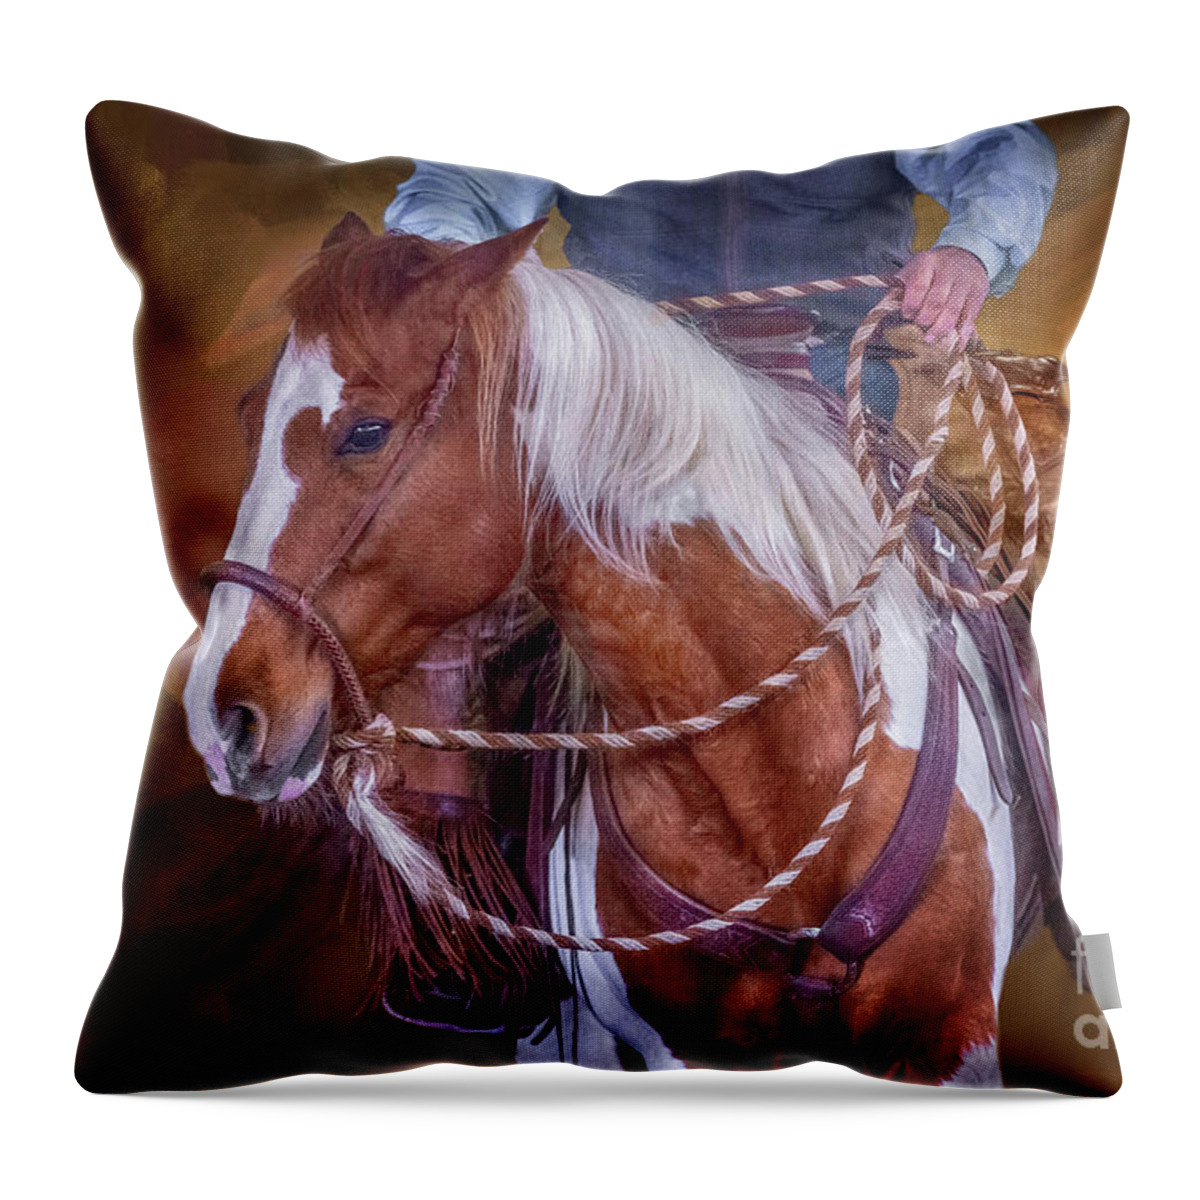 Cattle Throw Pillow featuring the photograph Cattle Horse by JBK Photo Art